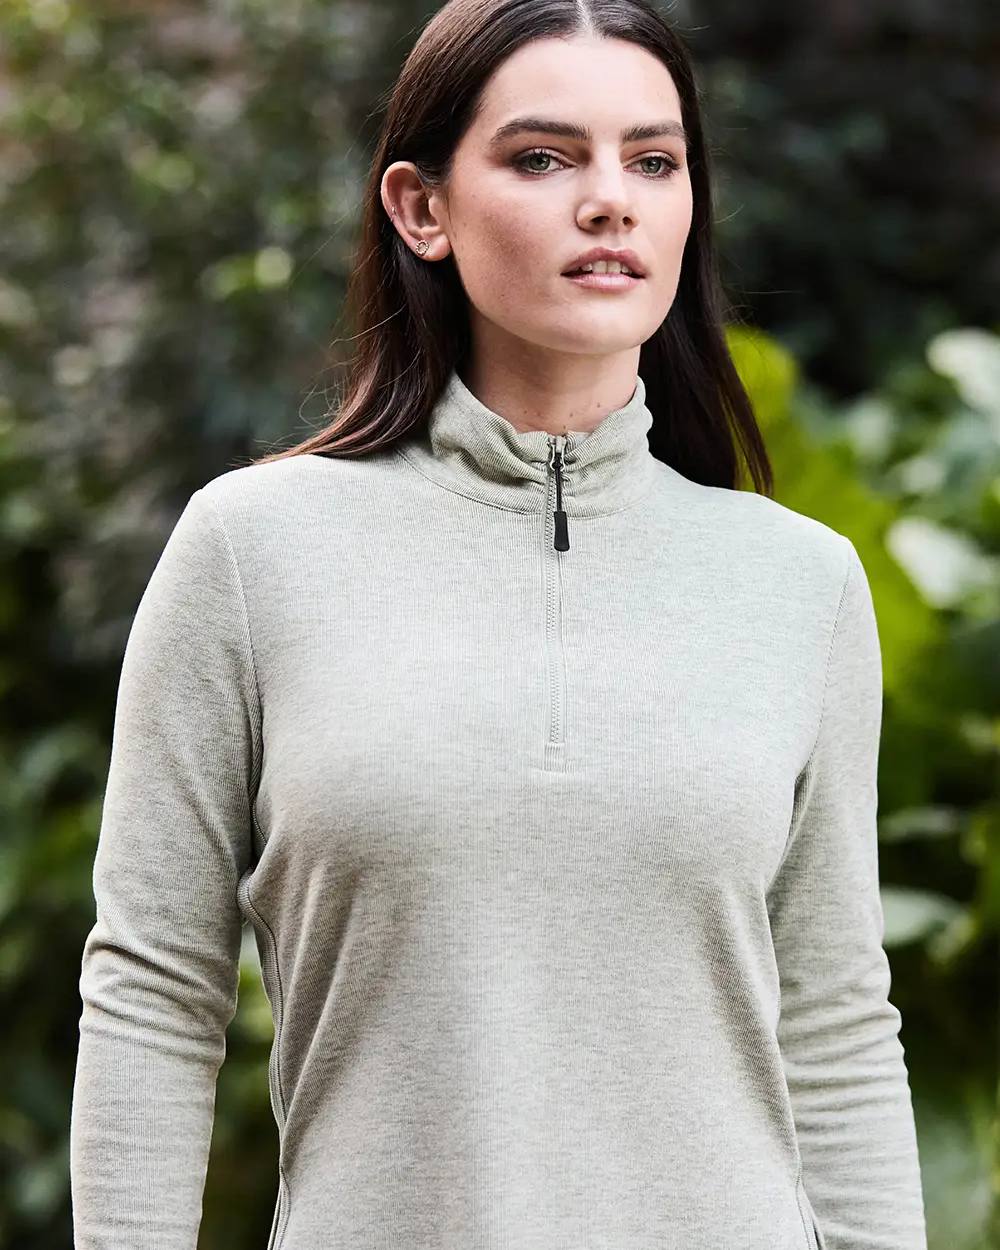 Dusty Olive Coloured WeatherBeeta London Layer Long Sleeve Top On A blurry Background 